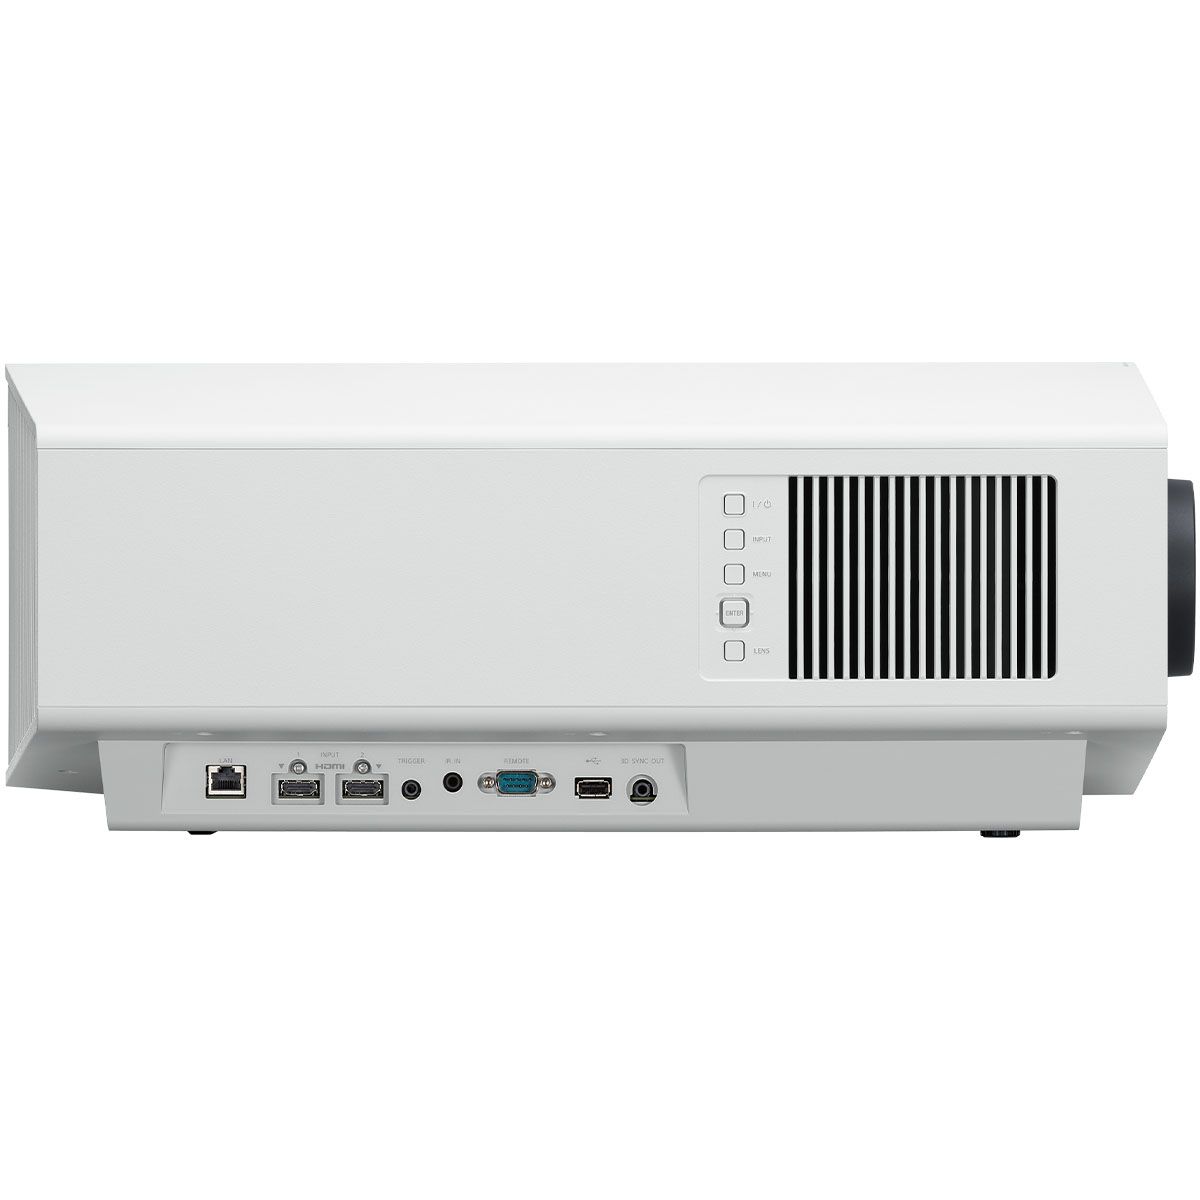 Sony VPL-XW6000ES Native 4K SXRD Laser Projector - side view with inputs - white